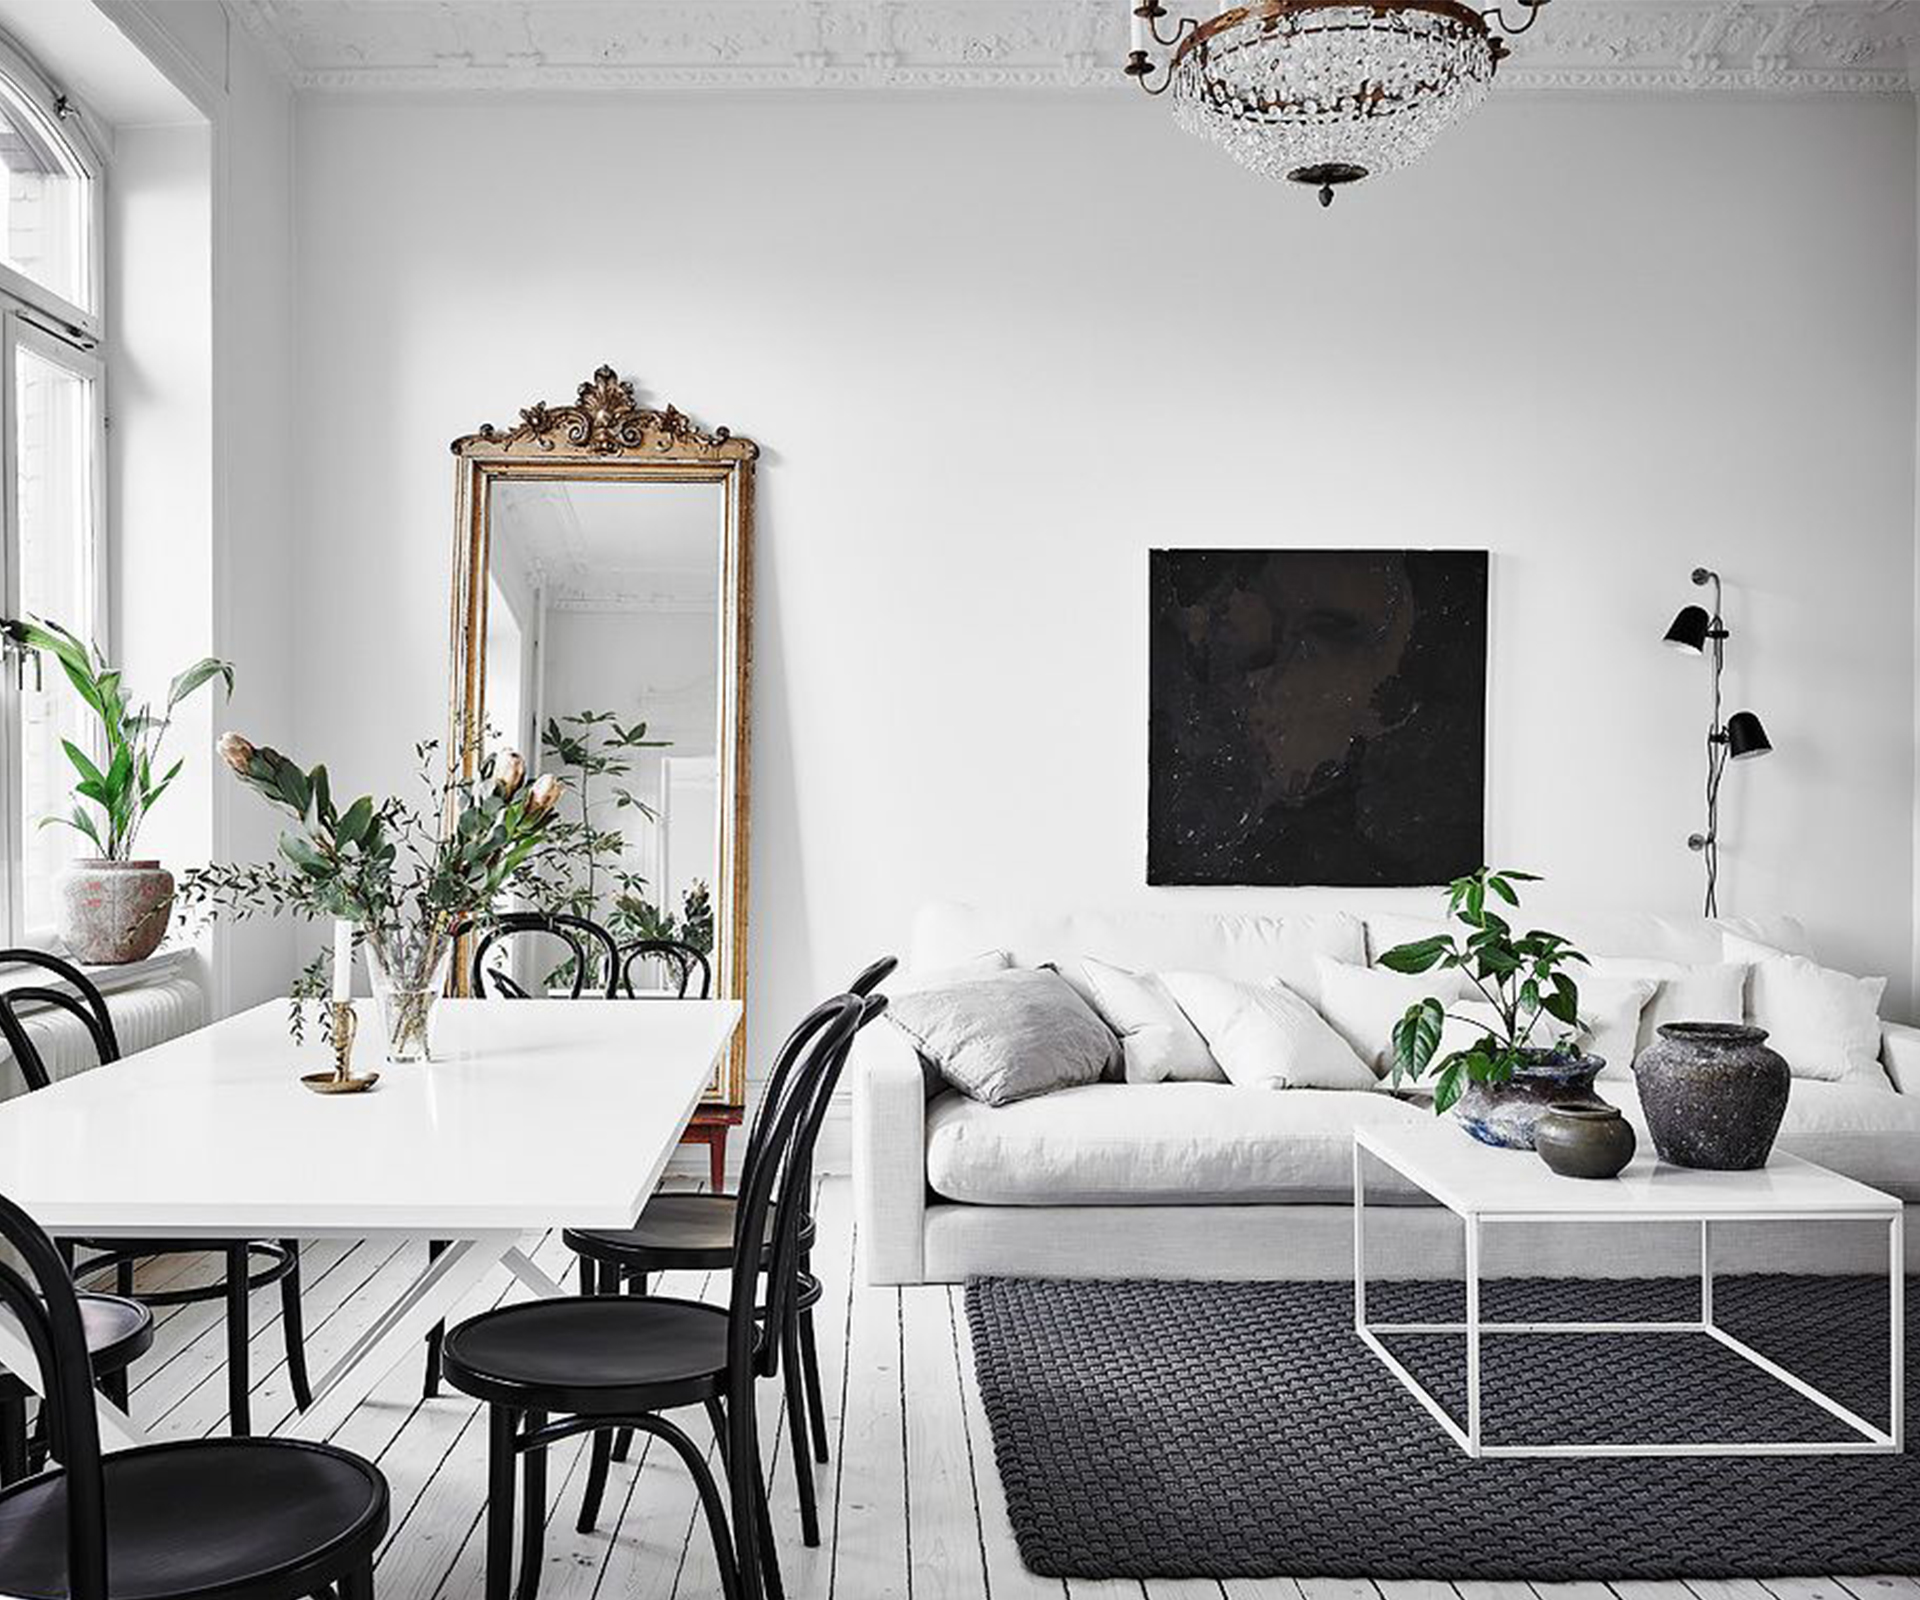 10 Instagram accounts to follow for the ultimate interior inspiration